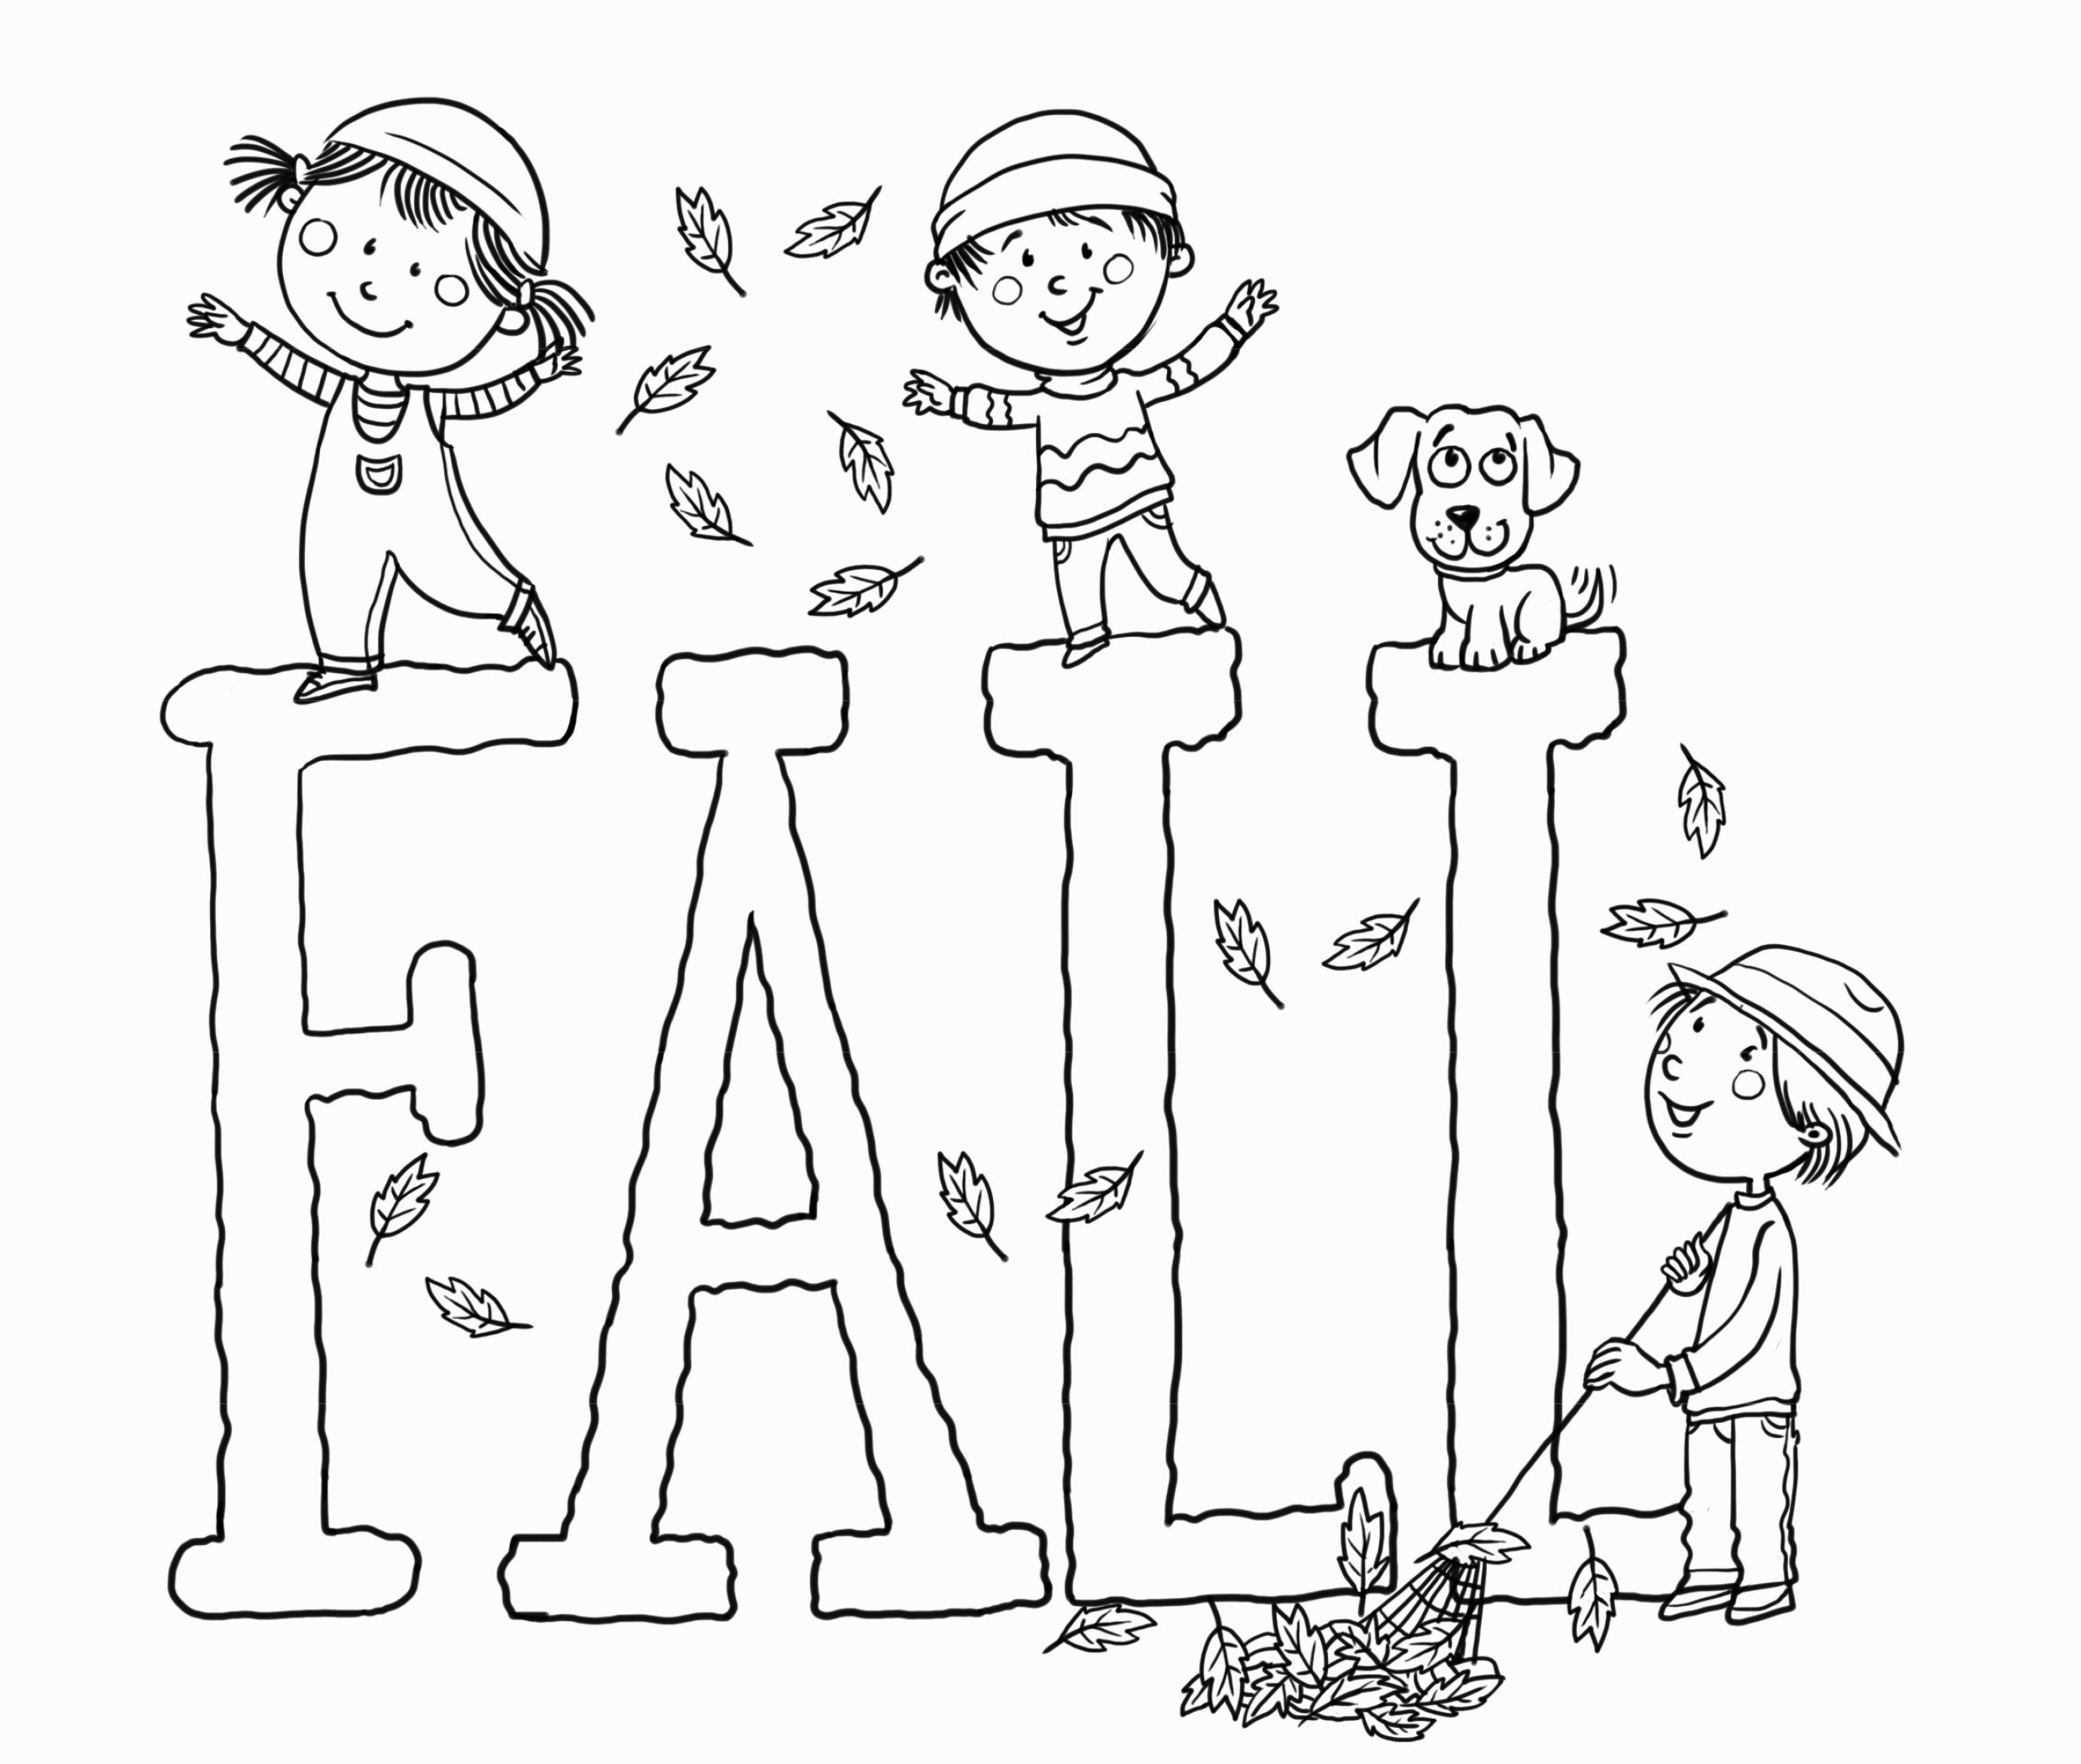 Harvest Coloring Pages Apple Free Printable Fall At Bitslice Me 2764 - Free Printable Fall Harvest Coloring Pages